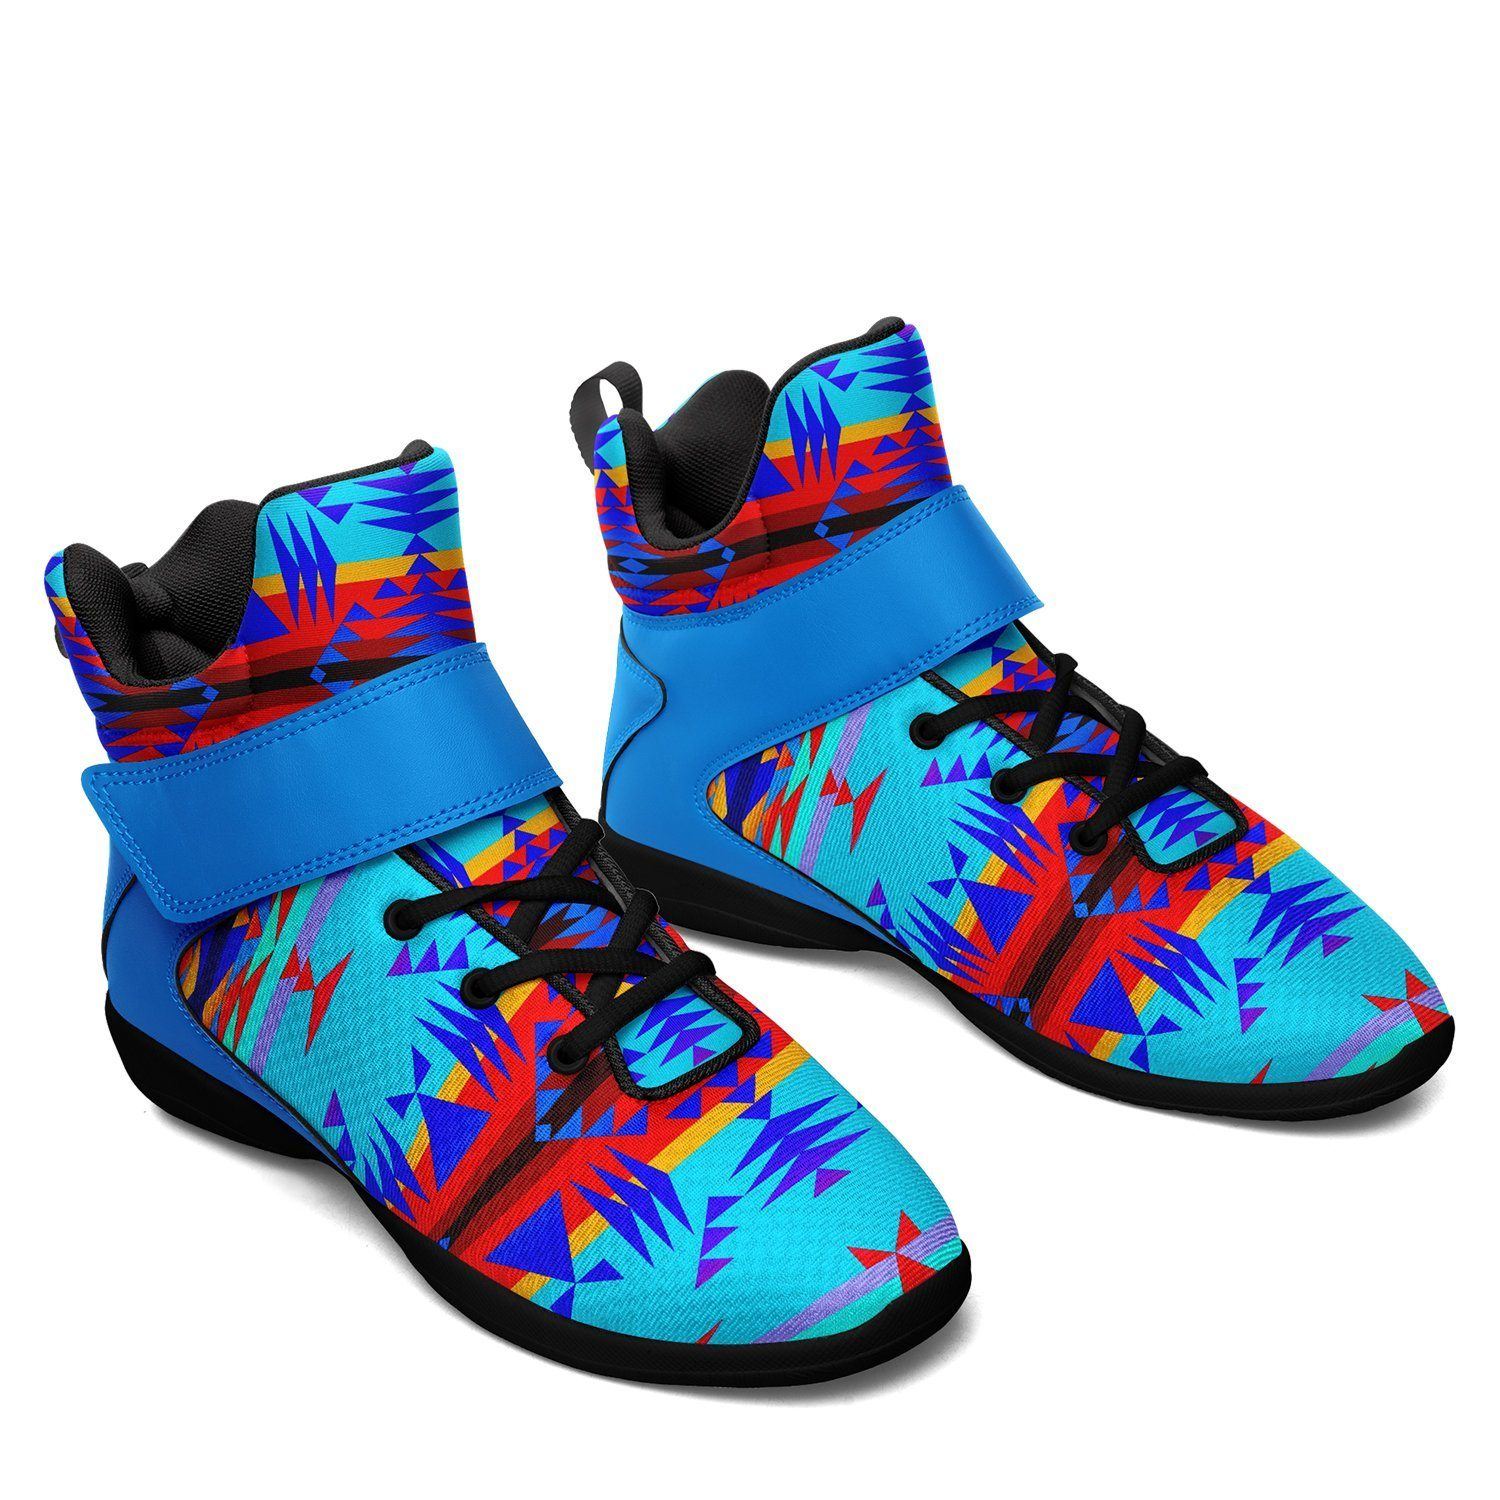 Between the Mountains Blue Ipottaa Basketball / Sport High Top Shoes - Black Sole 49 Dzine 